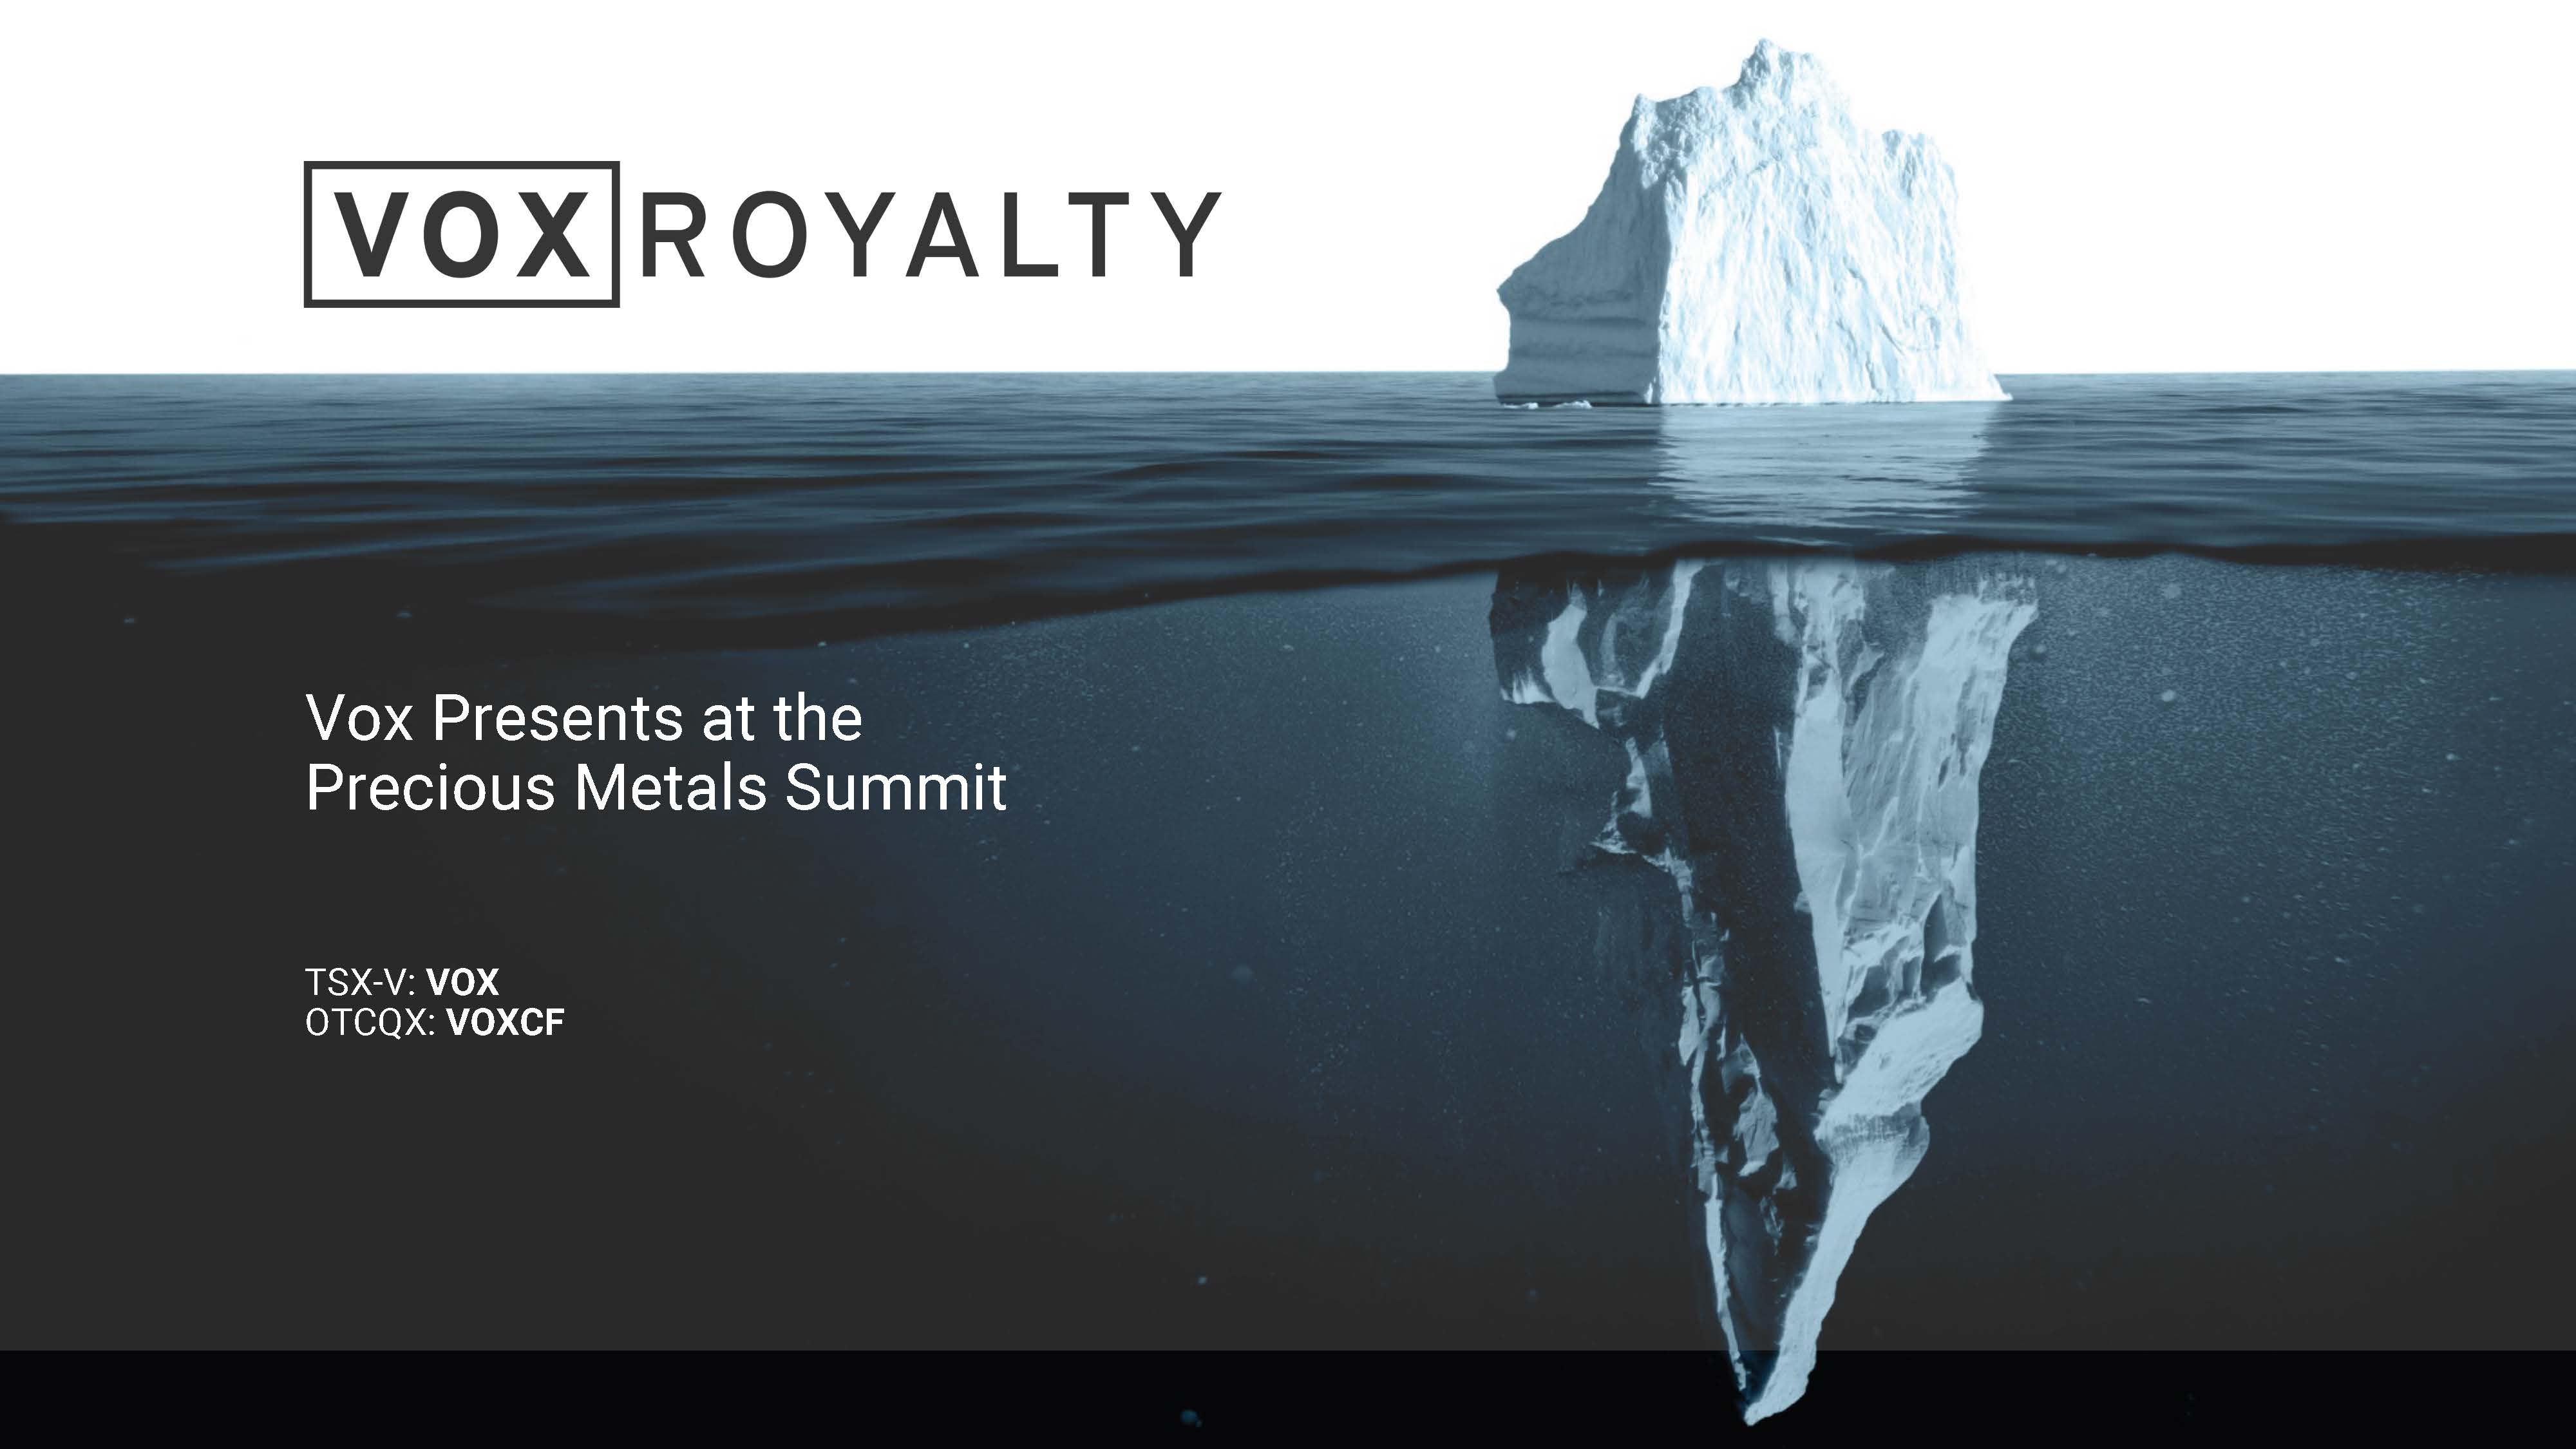 Vox Royalty presents at the Precious Metals Summit on September 10, 2021